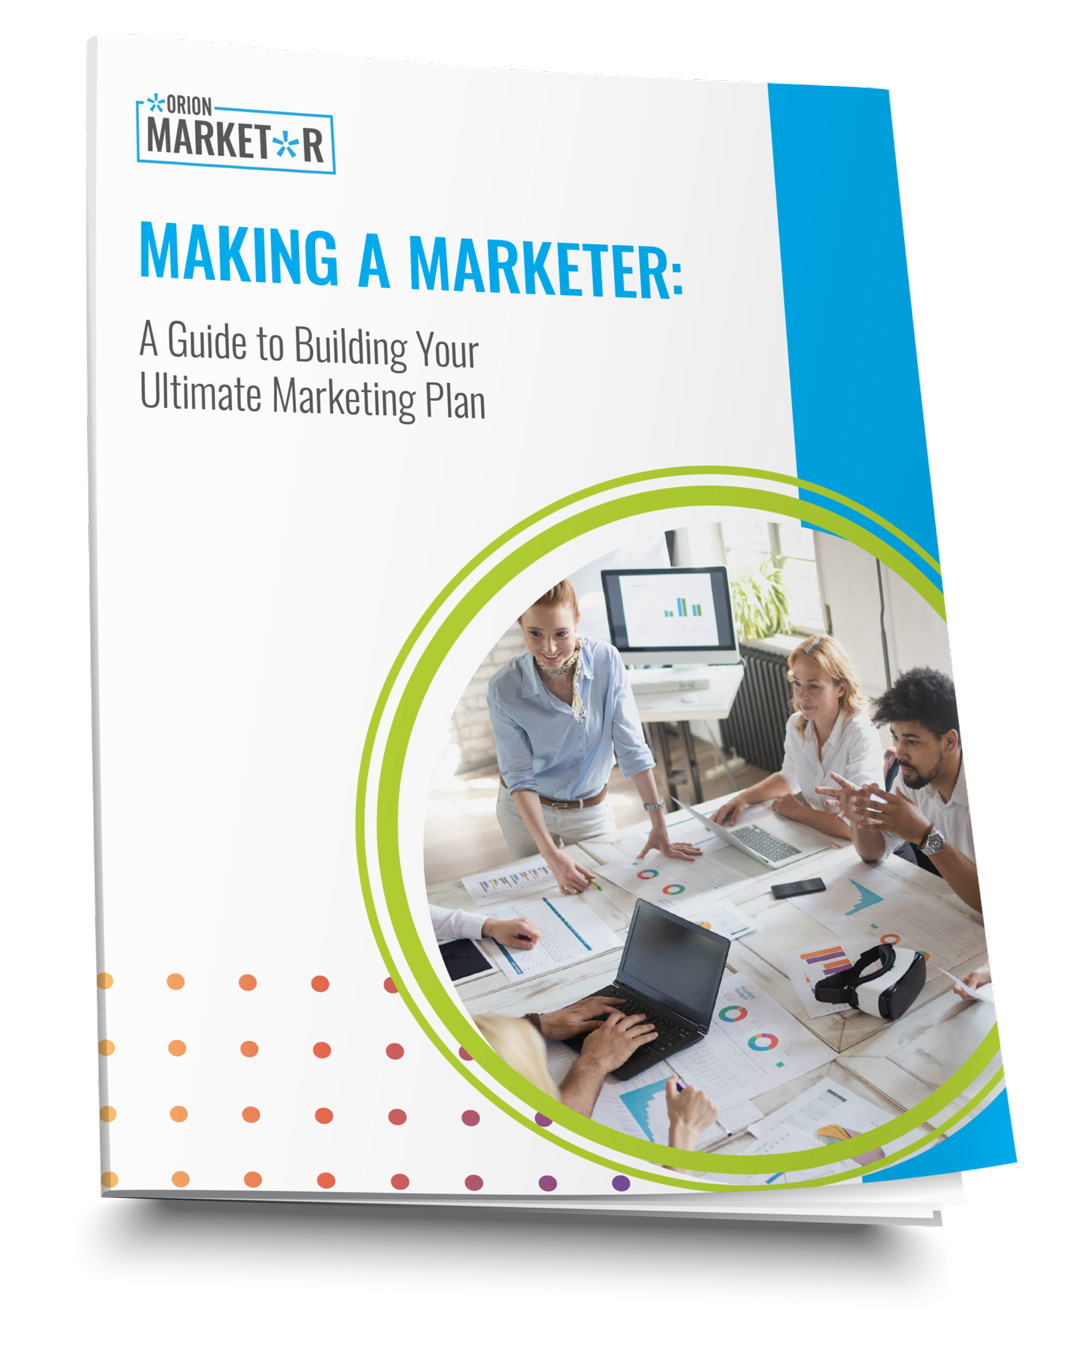 A Guide to Building Your Own Marketing Plan